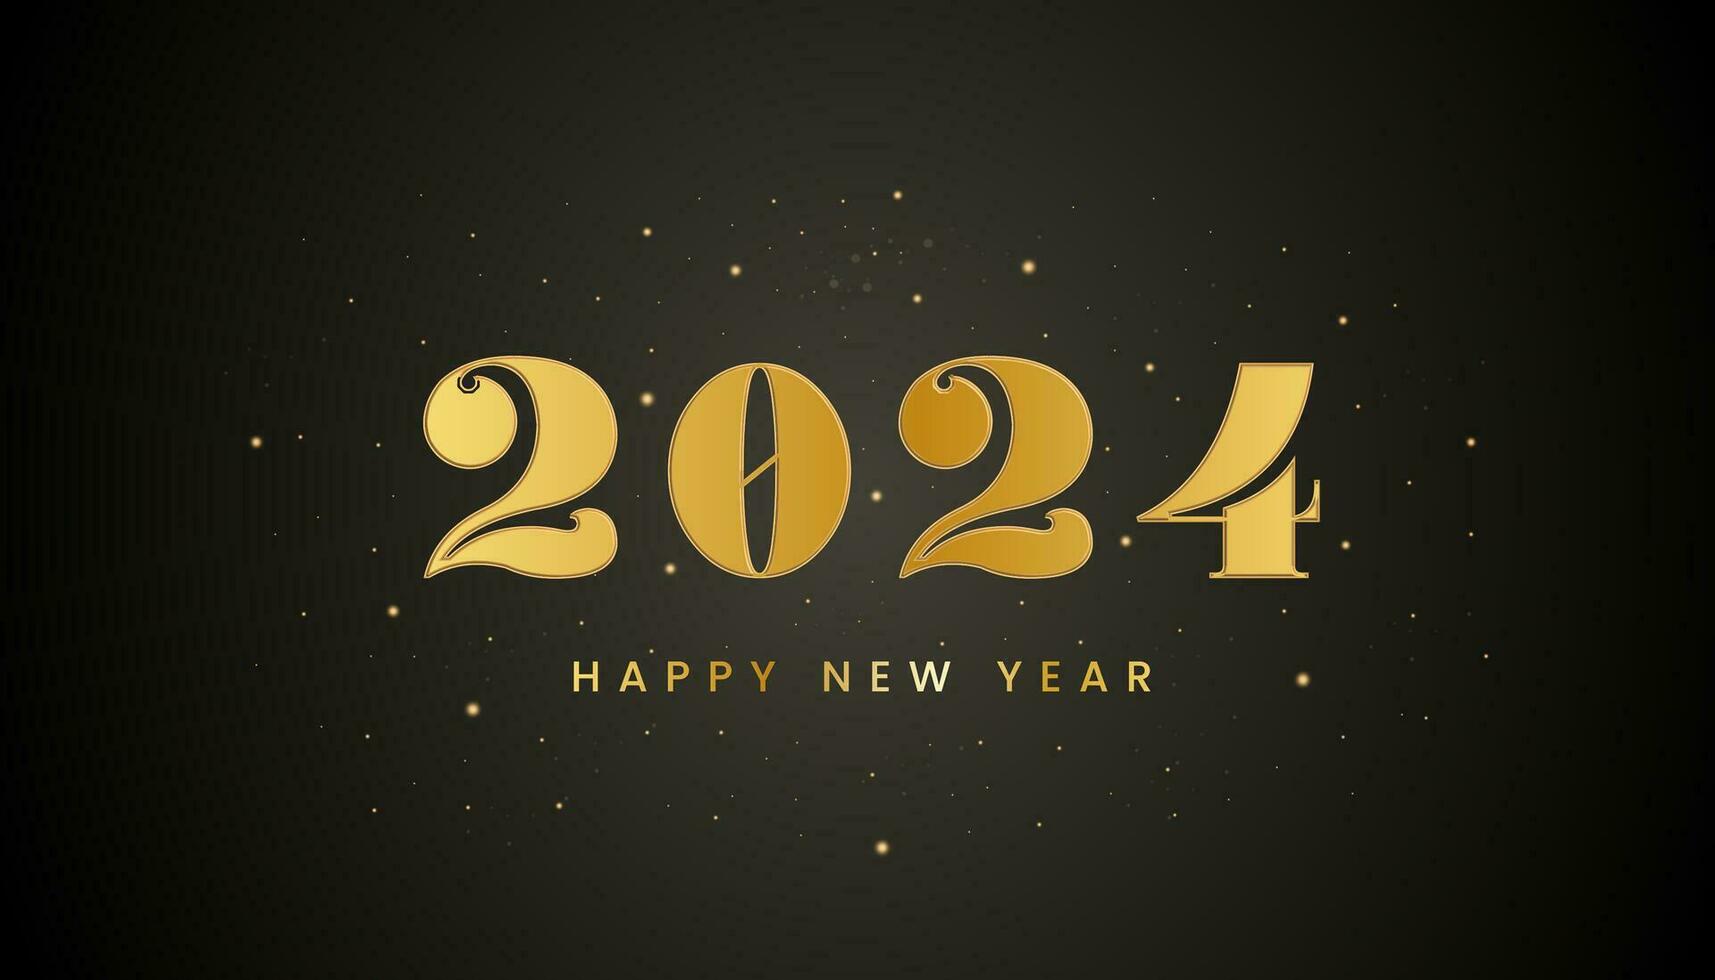 2024 Happy new year banner with Golden metallic numbers date 2024 and flickering fireworks. Dark luxury background. Vector illustration